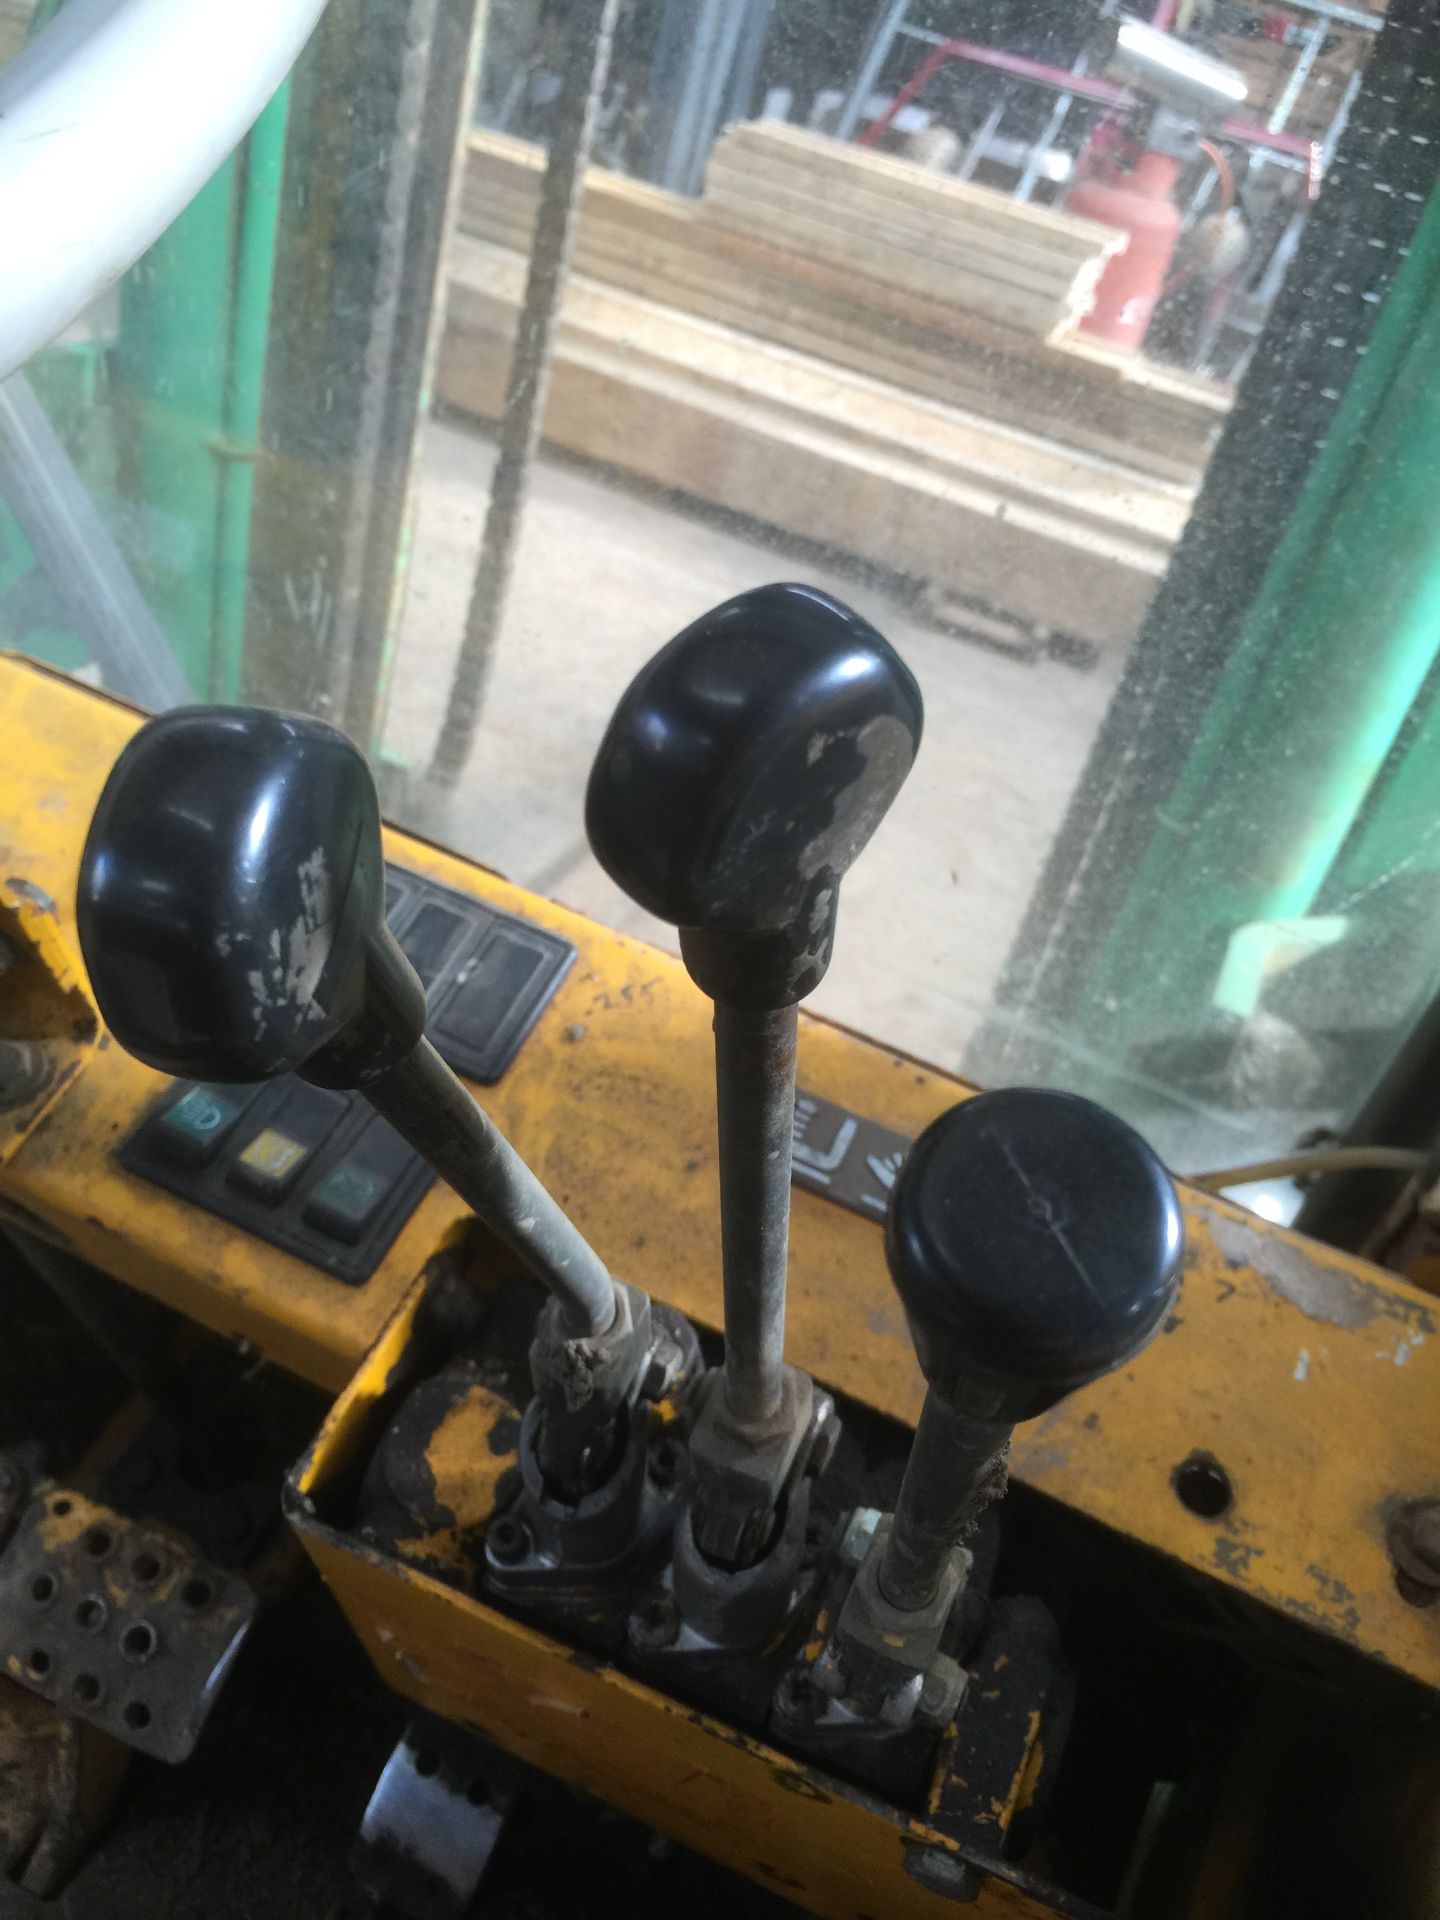 JCB 926 Lift Truck 4282 hours - old but in good working order, starts first time. (extension tines - Image 6 of 11